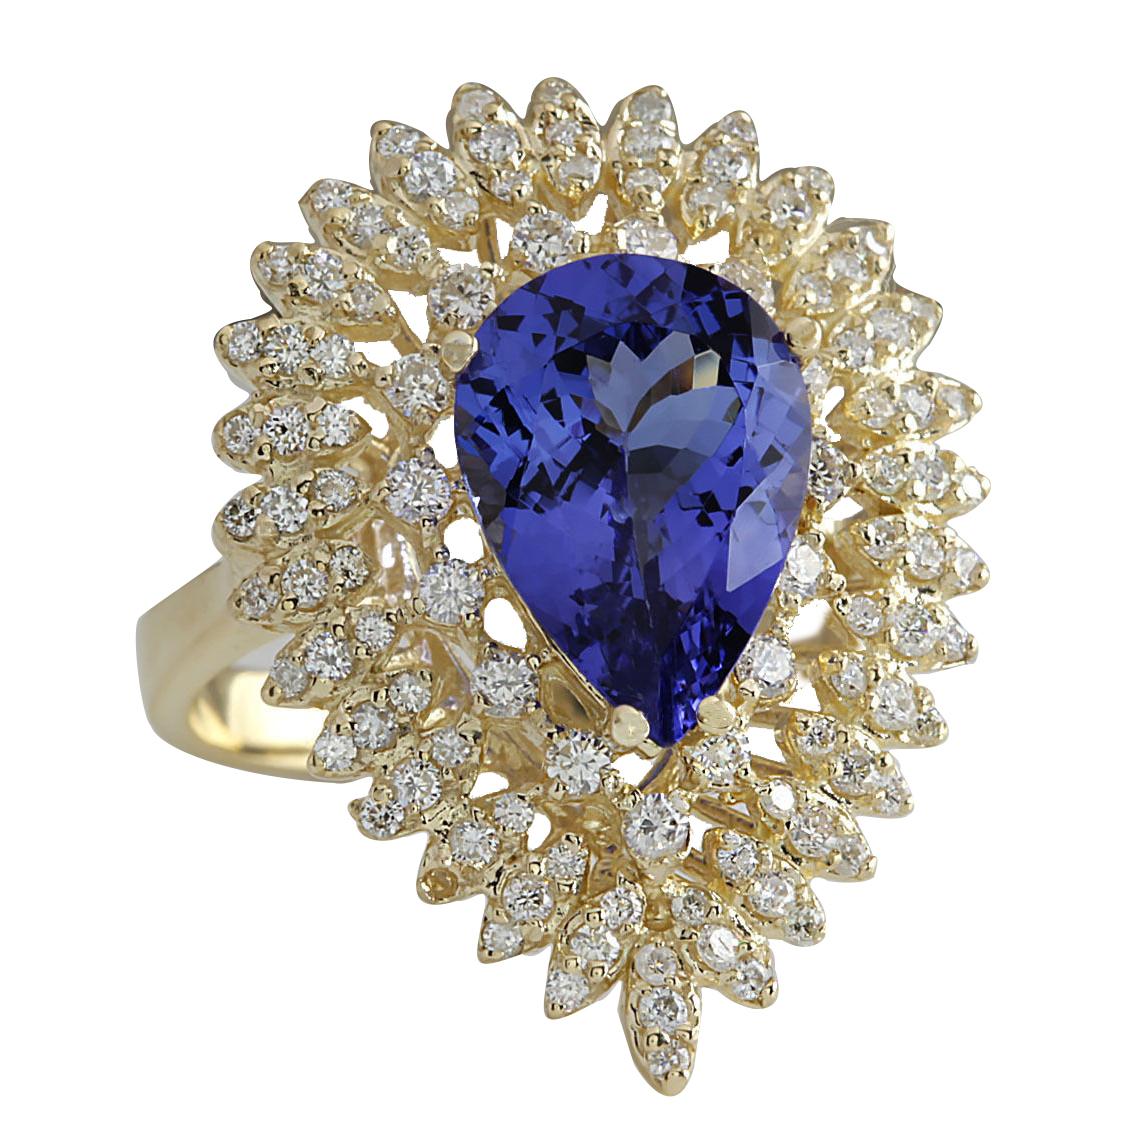 4.68 Carat Natural Tanzanite 14 Karat Yellow Gold Diamond Ring
Stamped: 14K Yellow Gold
Total Ring Weight: 7.2 Grams
Total Natural Tanzanite Weight is 3.68 Carat (Measures: 10.00x8.00 mm)
Color: Blue
Total Natural Diamond Weight is 1.00 Carat
Color: